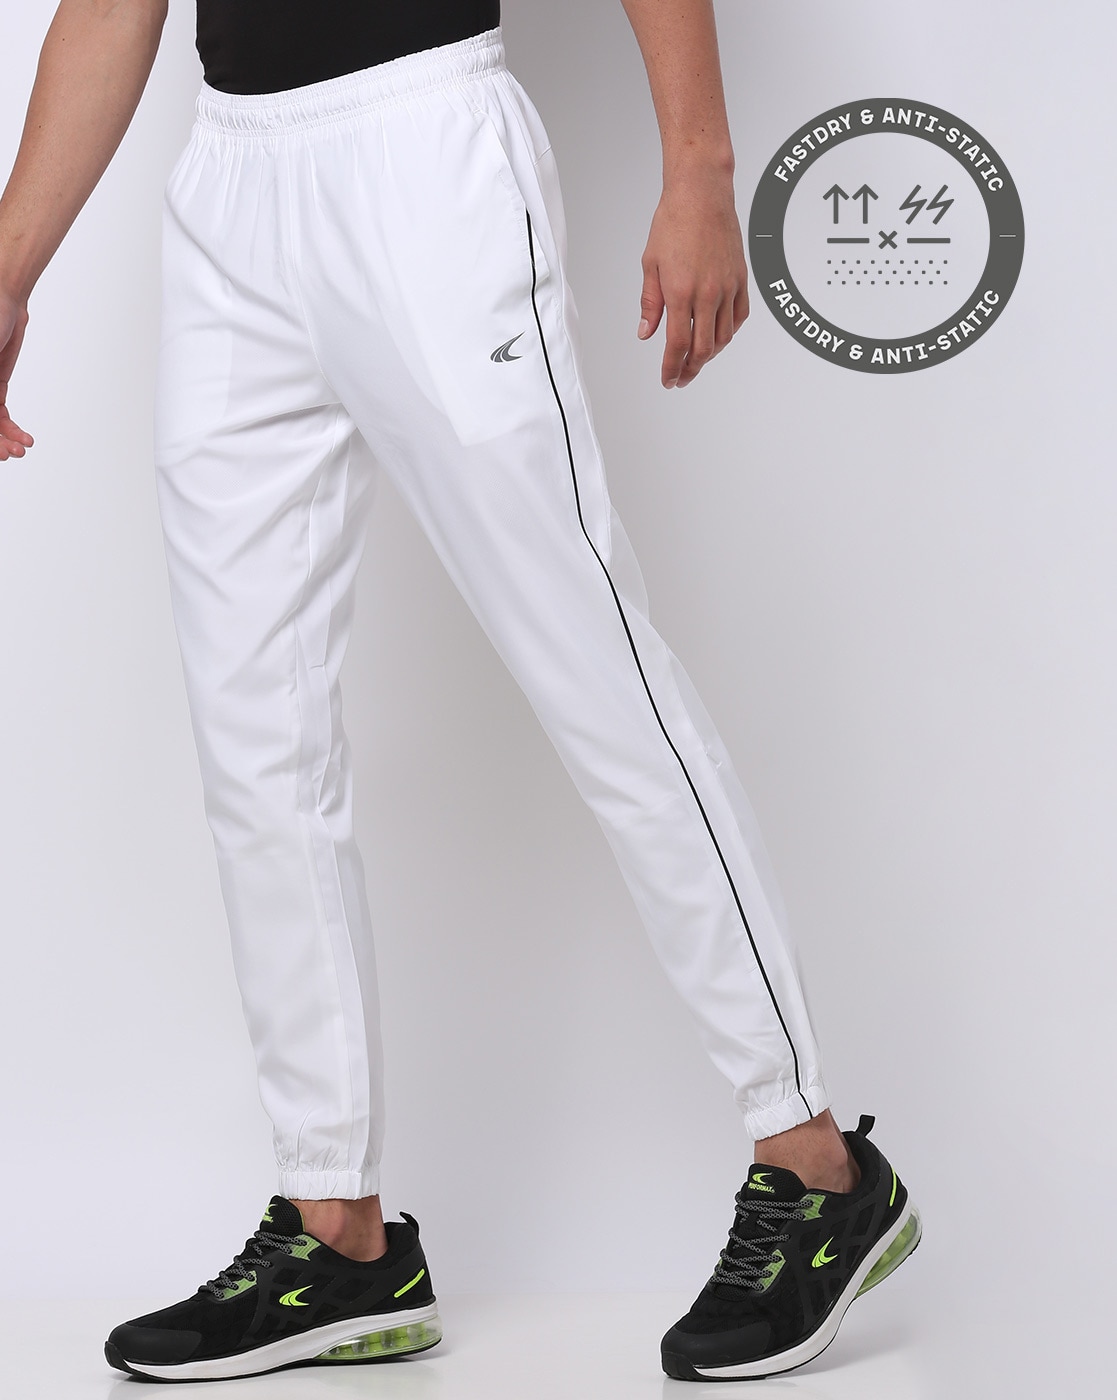 Discover more than 132 white track pants latest